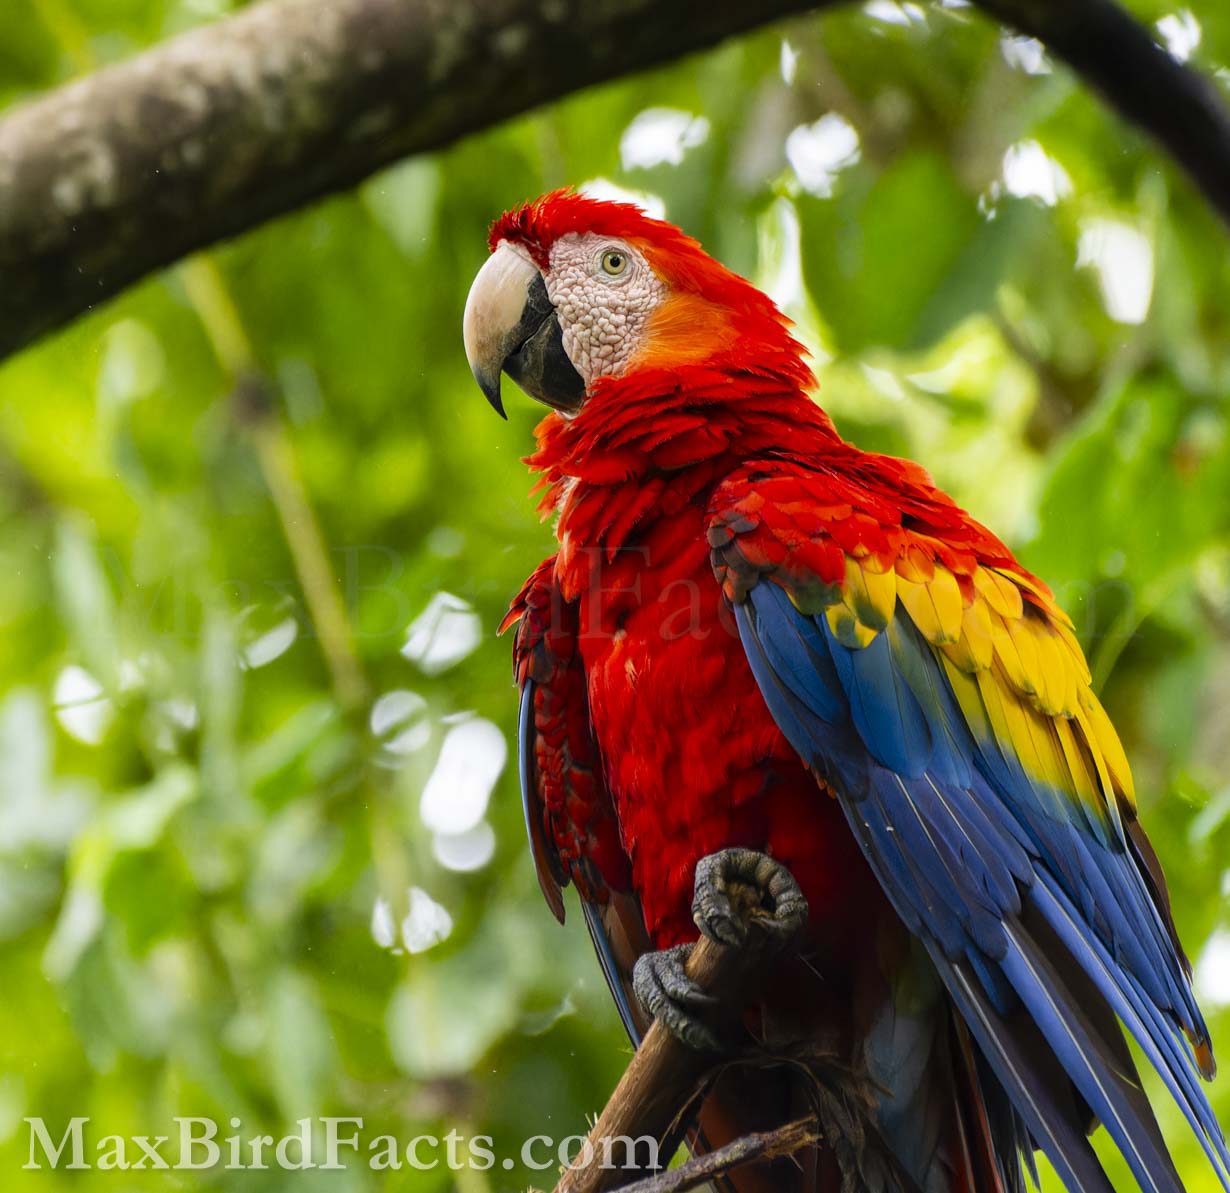 This Scarlet Macaw (Ara macao) has some of the most beautiful plumage in the avian world. While it isn’t necessarily the most ornate, the simplicity is spectacular. Looking at the dorsal coverts on the wings of this bird, you can see feathers that start at the base as yellow and end at their tip as blue. Even moving up slightly, the same is valid with feathers beginning red and terminating yellow. Still, the simple use of pigmentary red and yellow coloration contrasted with structural blue is superb. (Bay Islands, HN, 2023)